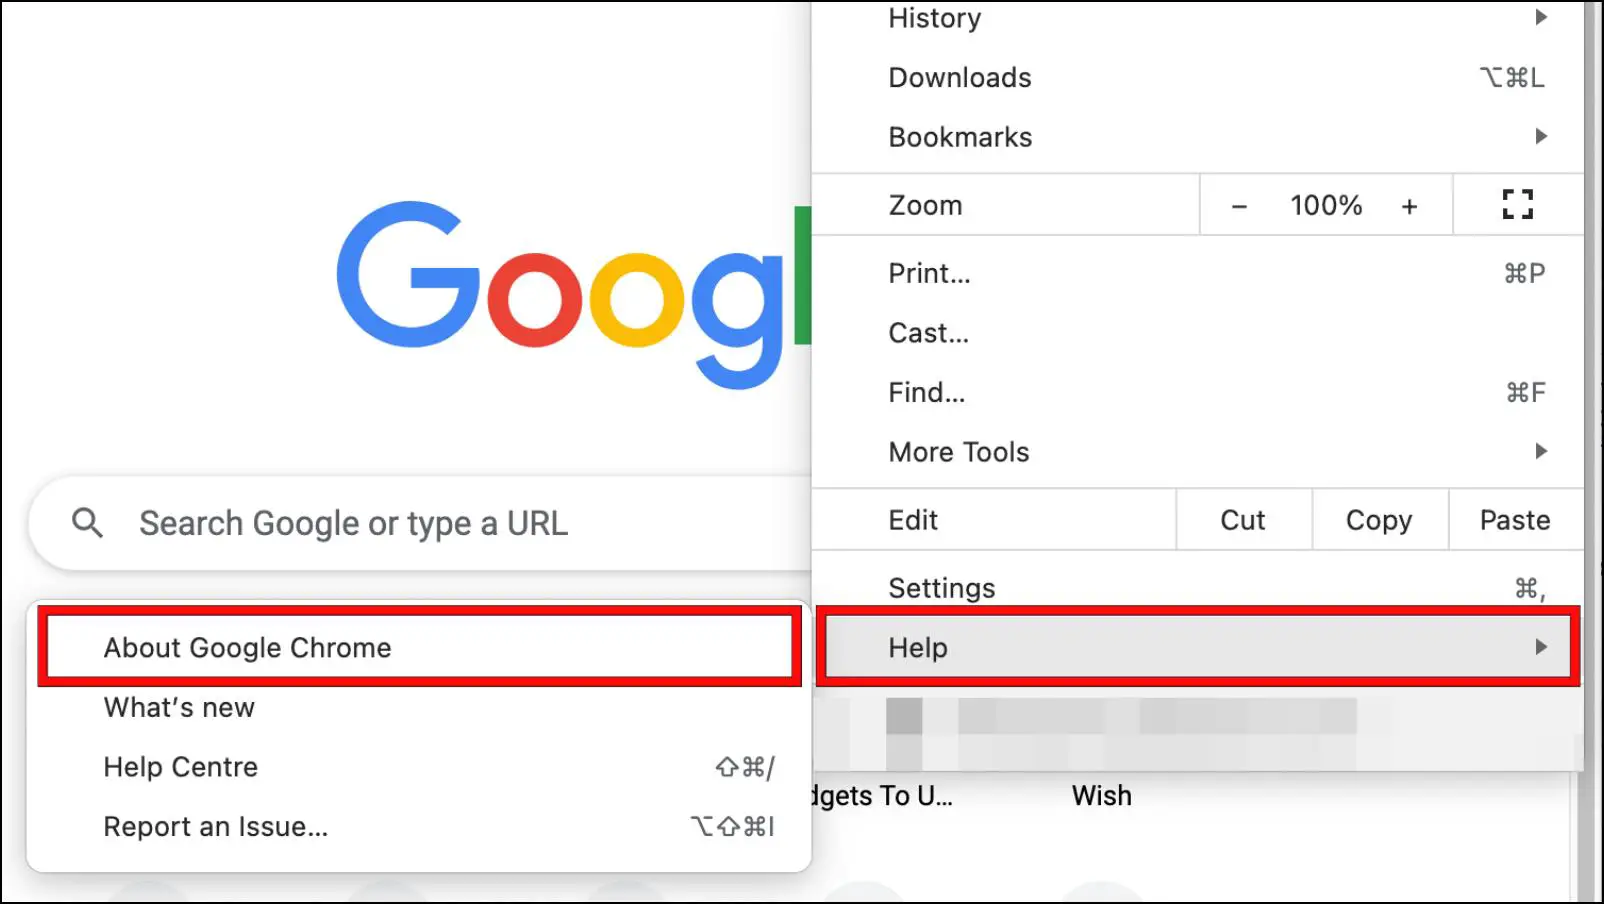 Go to About Chrome from the Help Option in Three Dot Menu